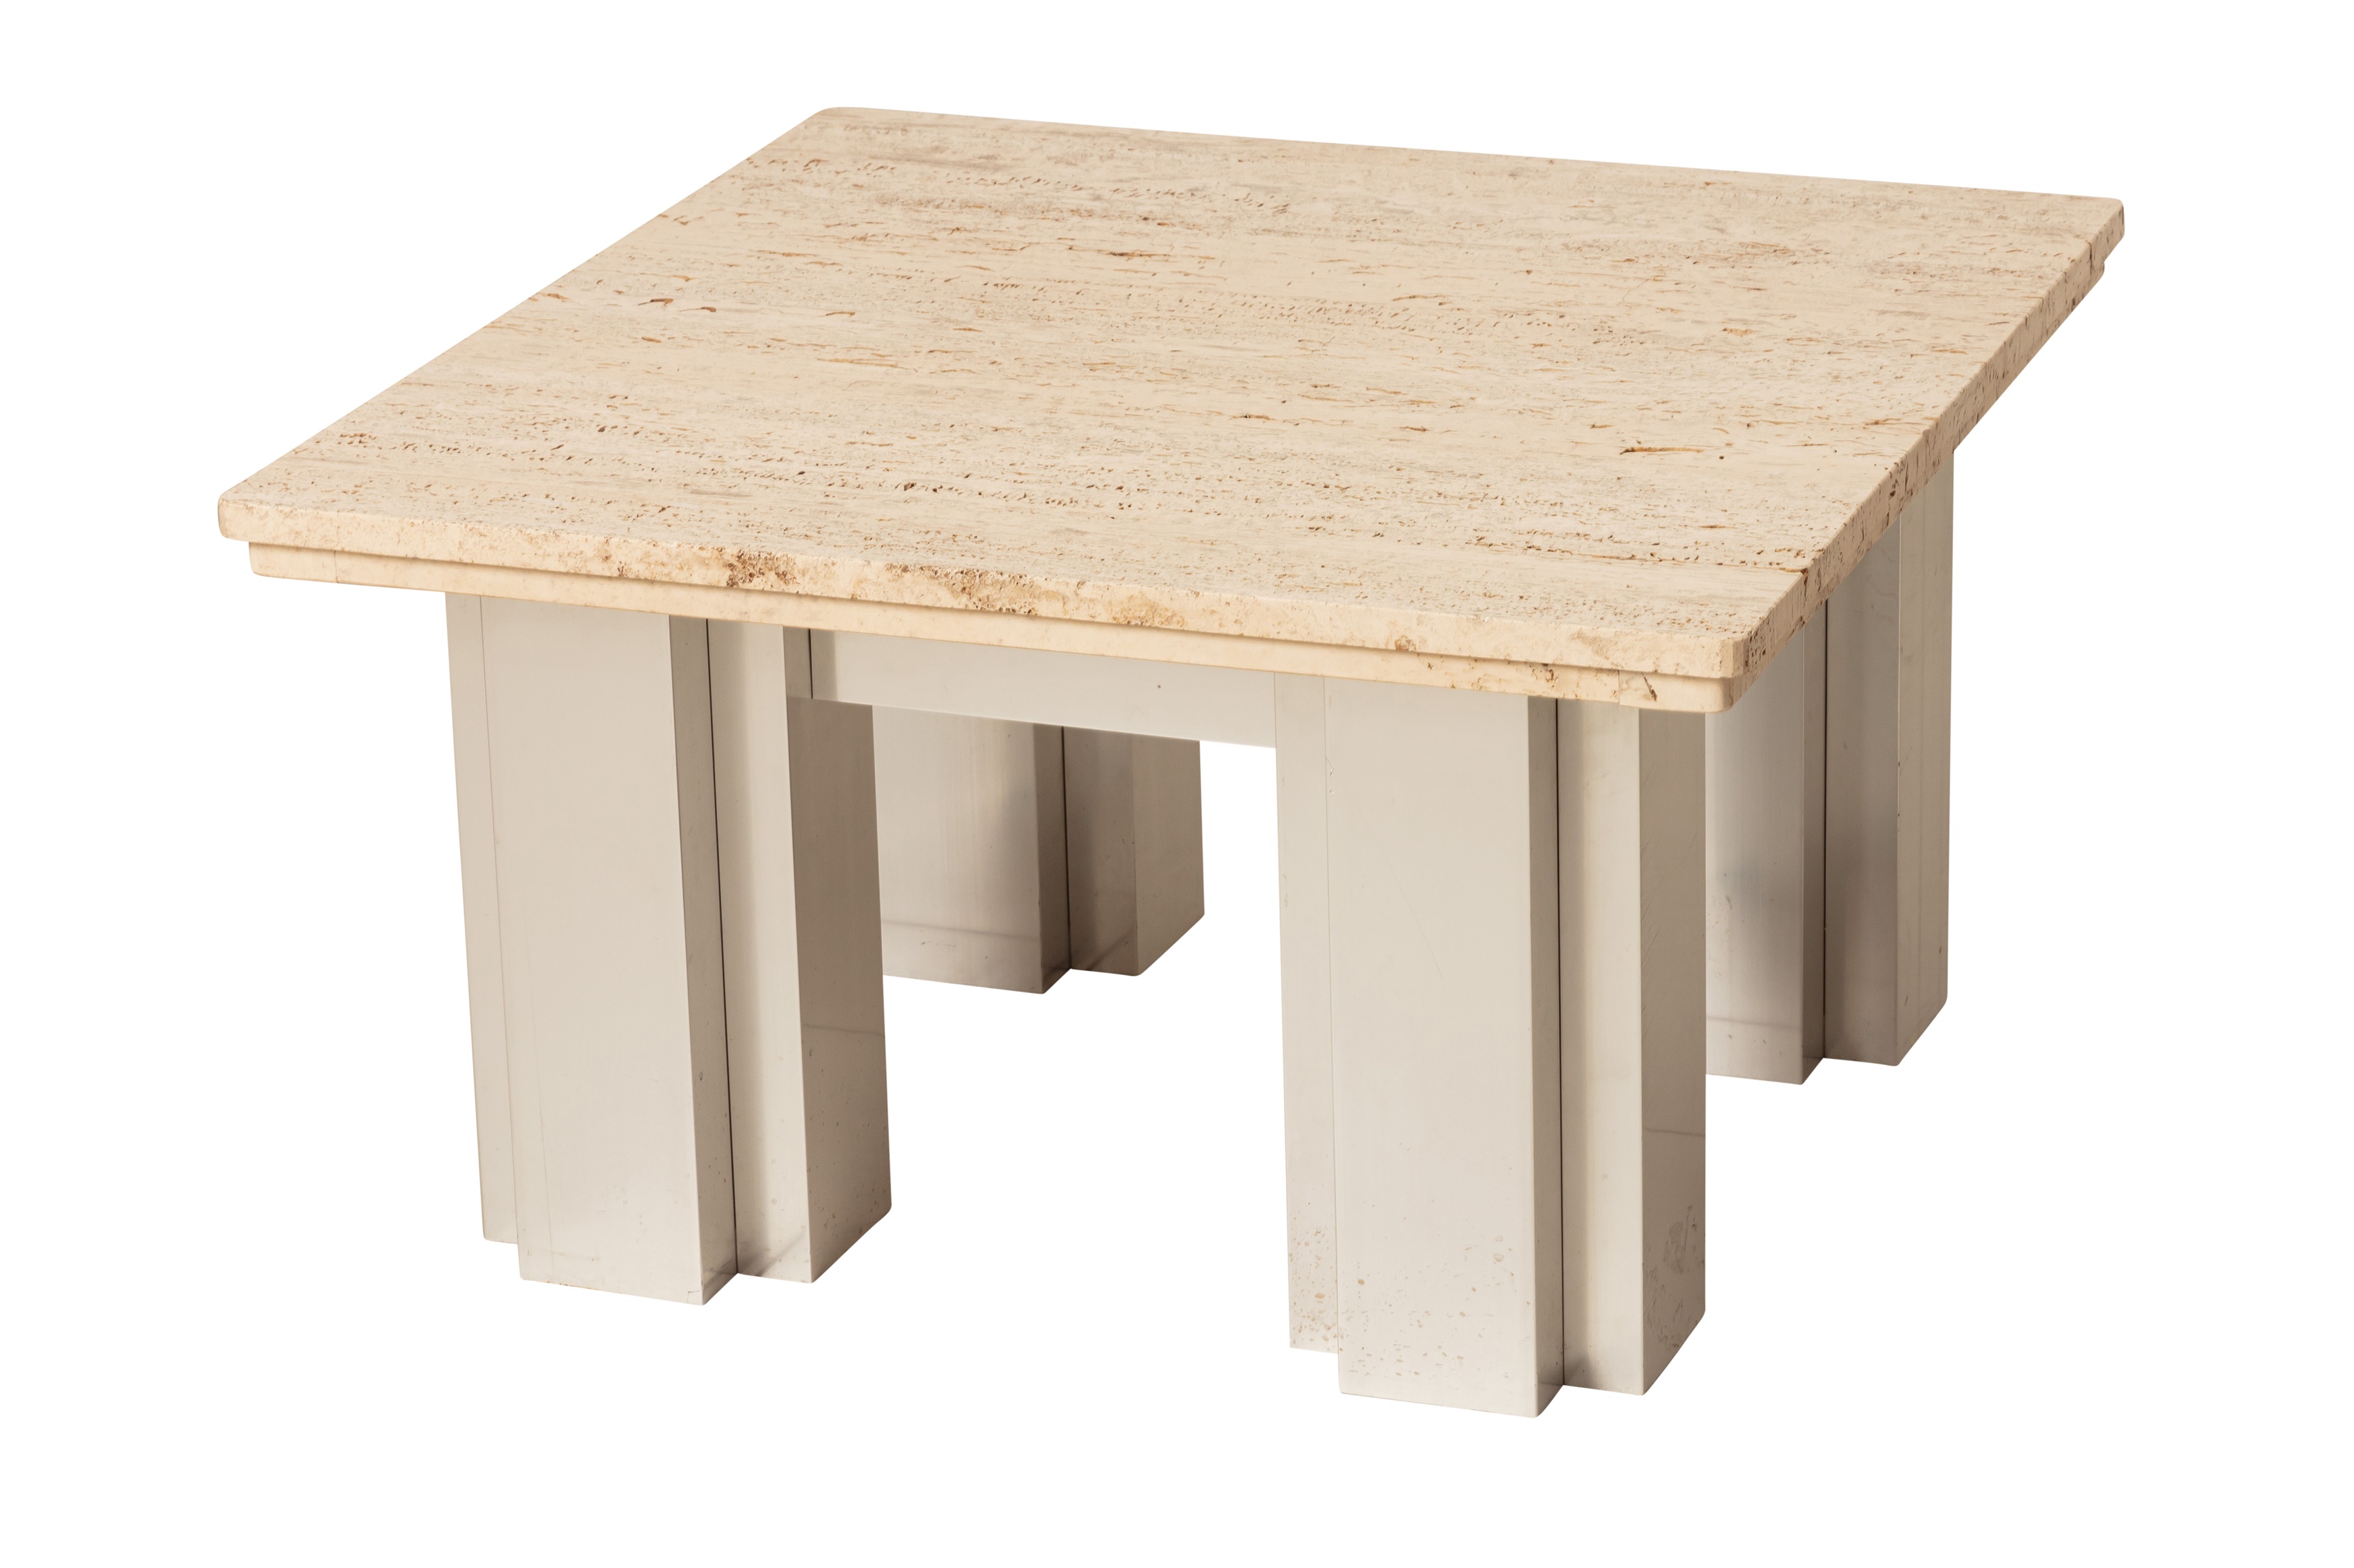 A TRAVERTINE COFFEE TABLE Preview: Barley Mow Centre